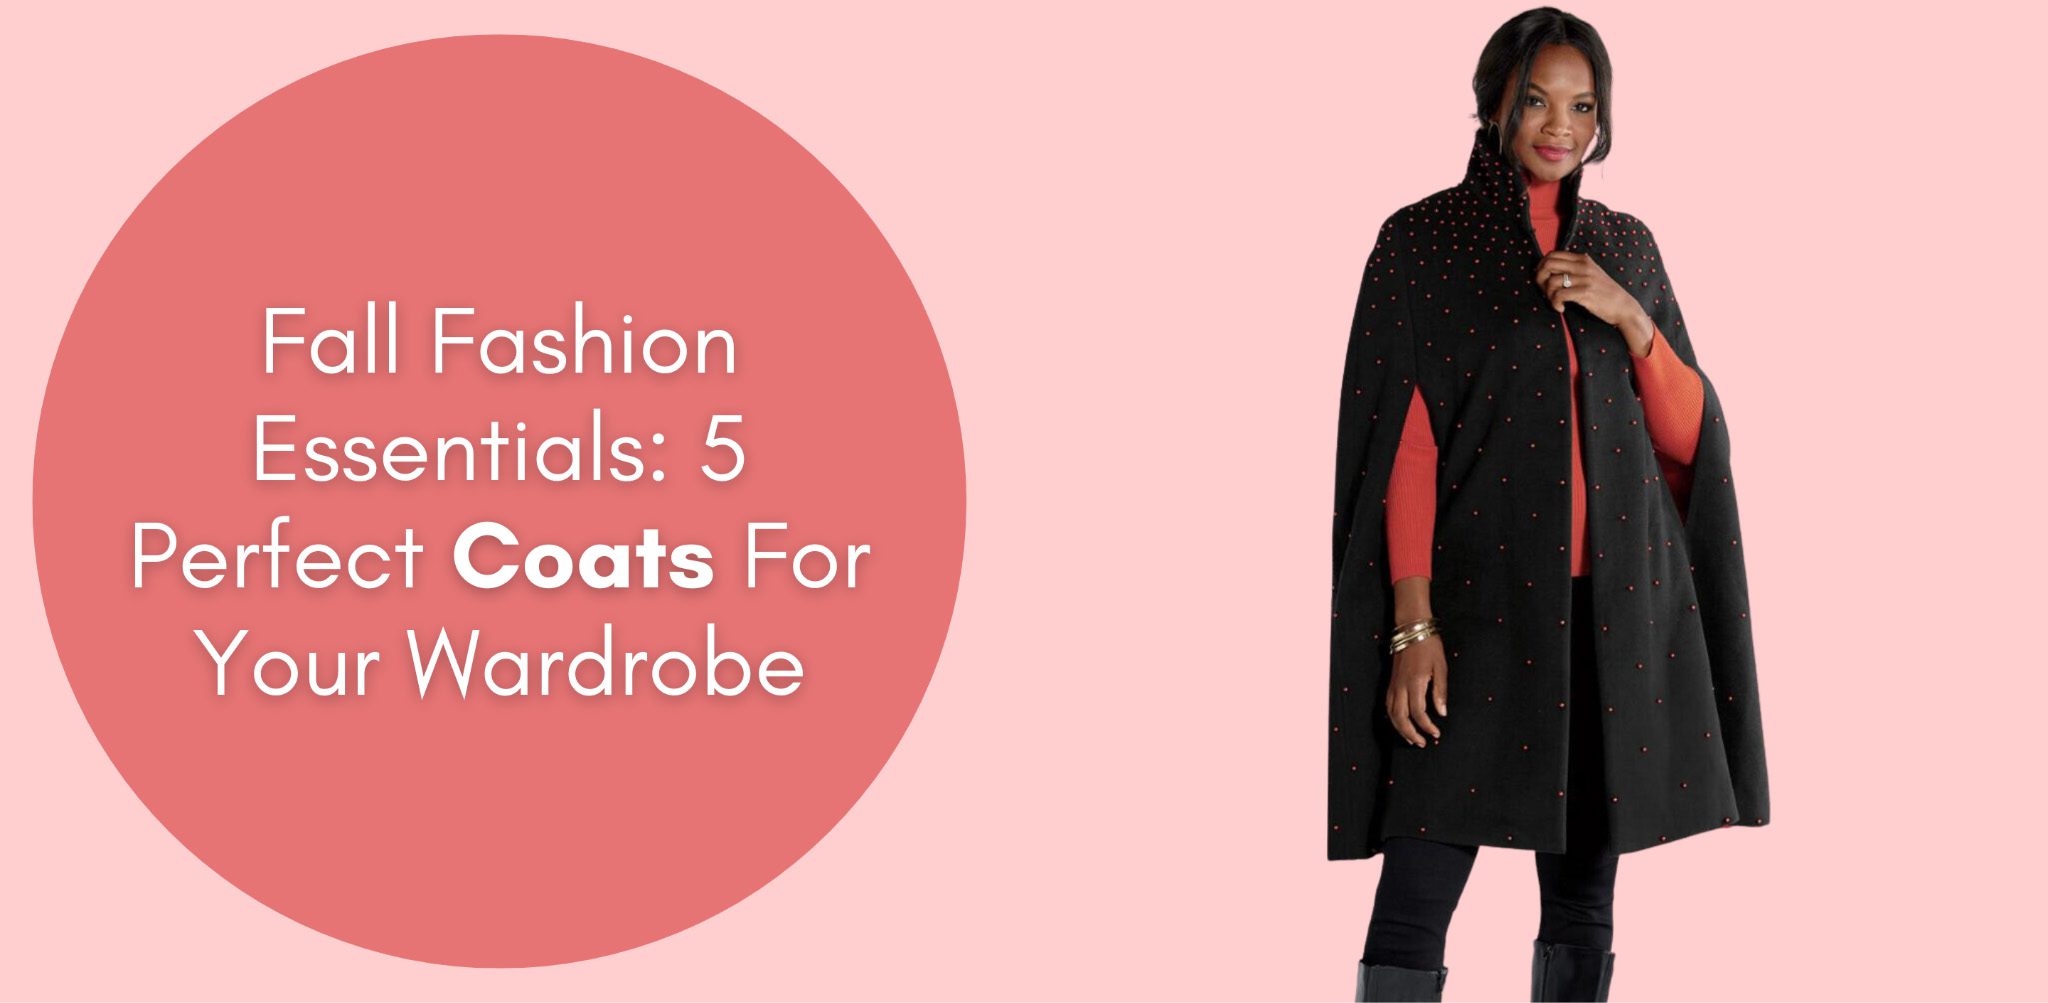 Fall Fashion Essentials: 5 Perfect Coats For Your Wardrobe